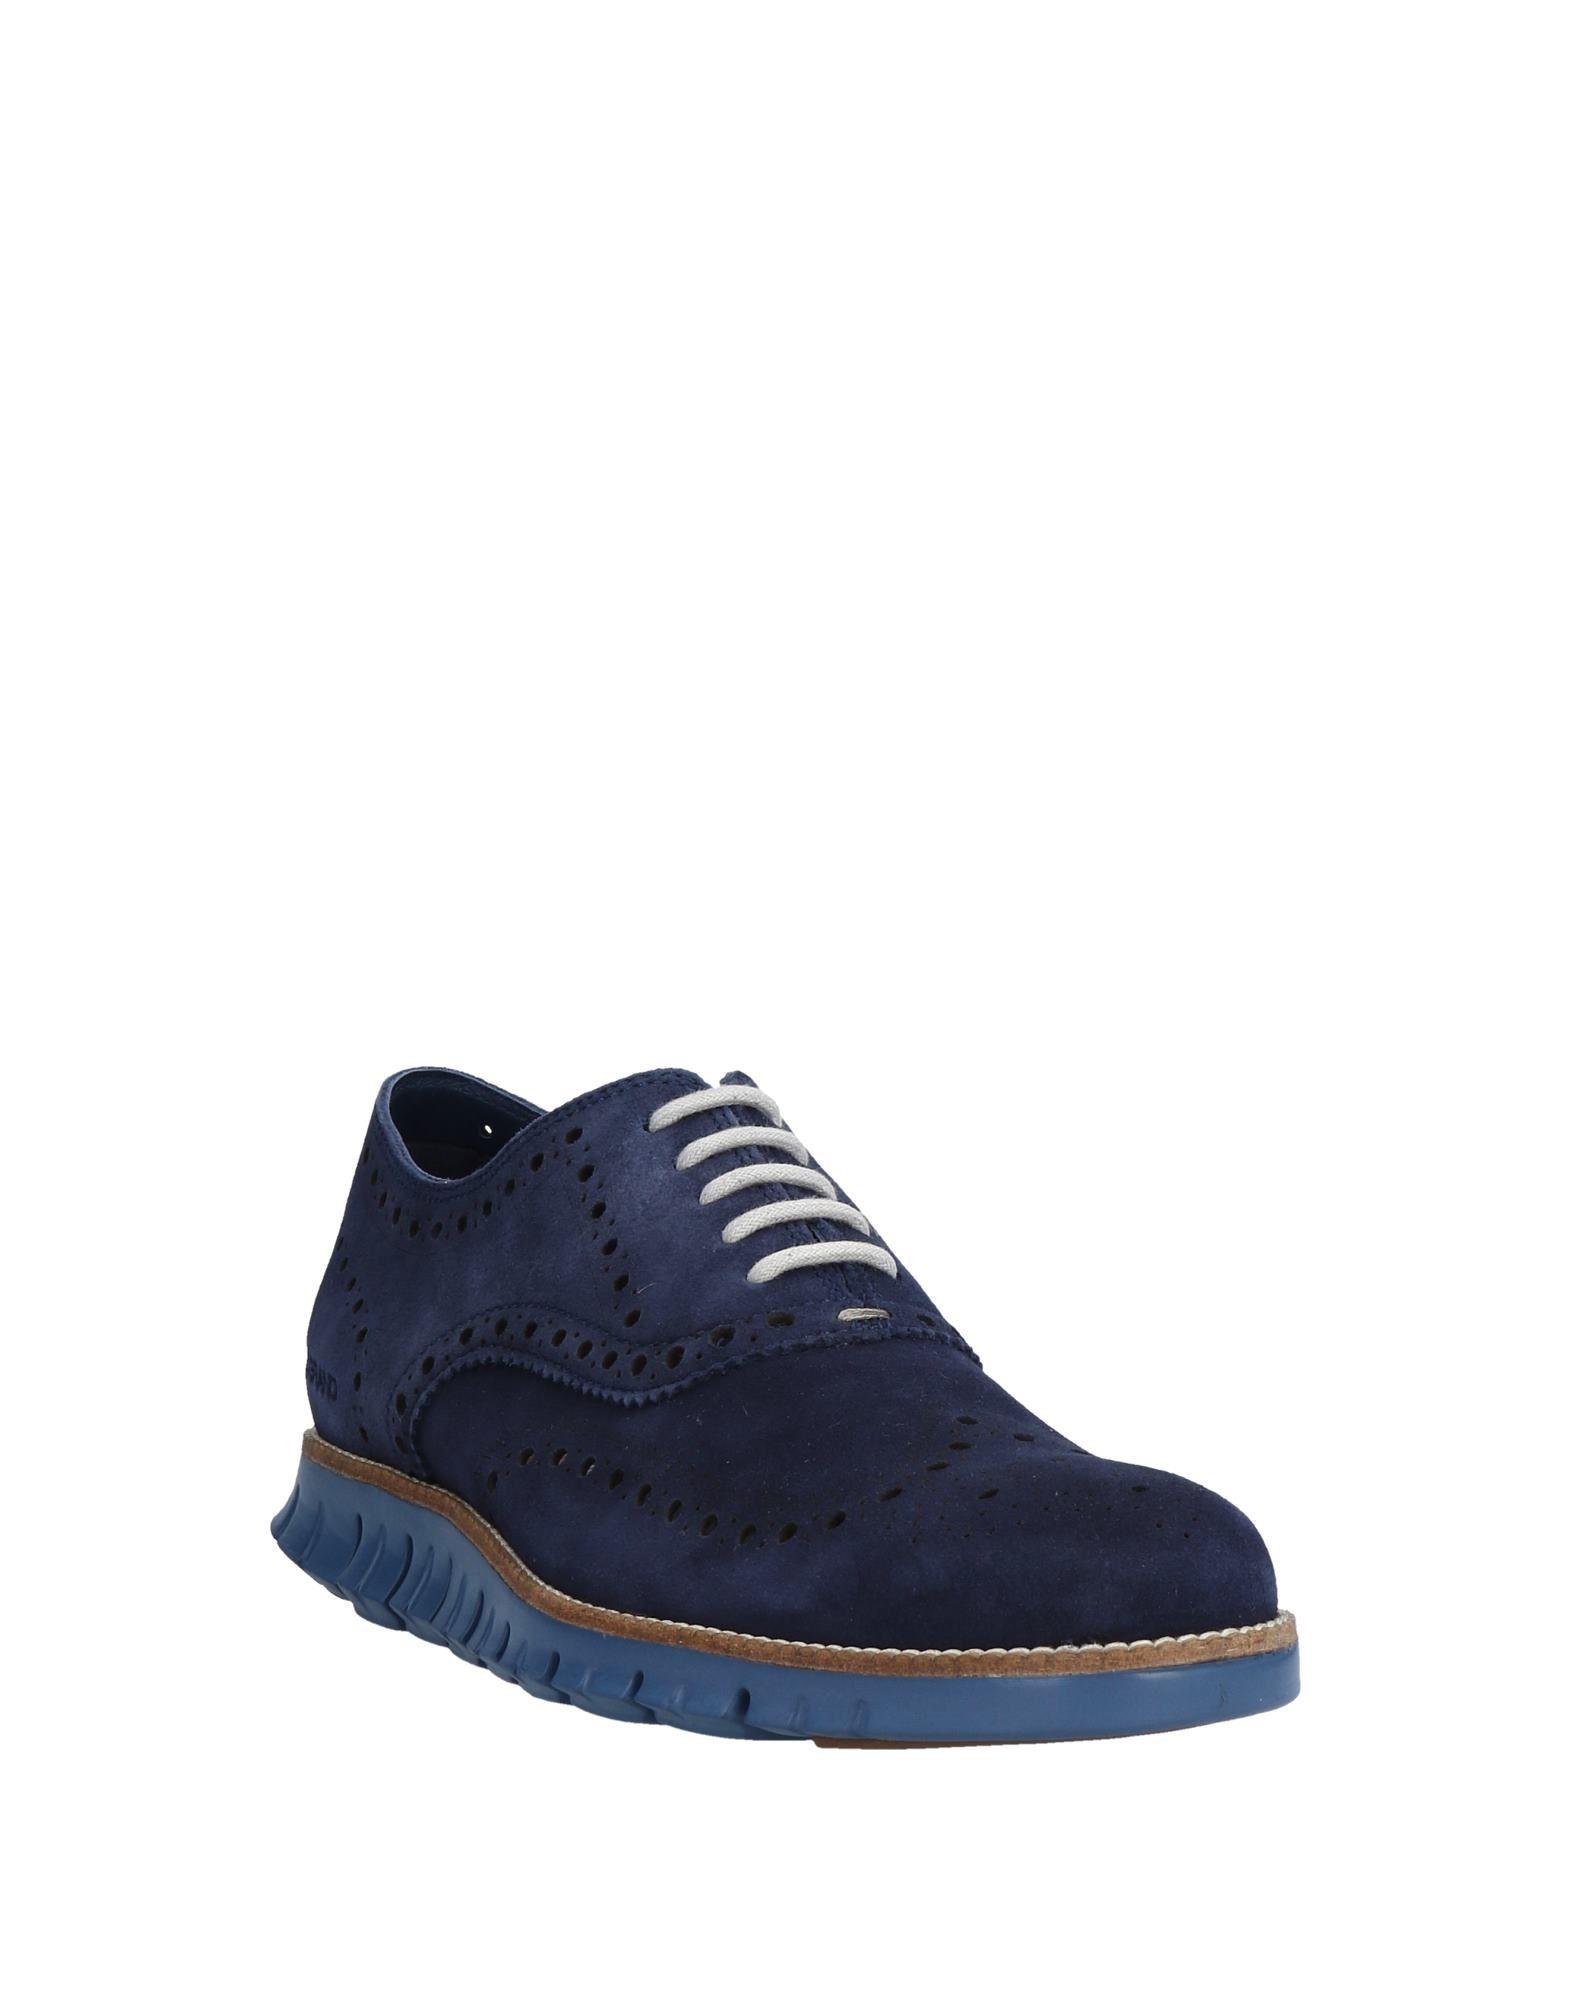 Cole Haan Leather Lace-up Shoe in Dark Blue (Blue) for Men - Lyst